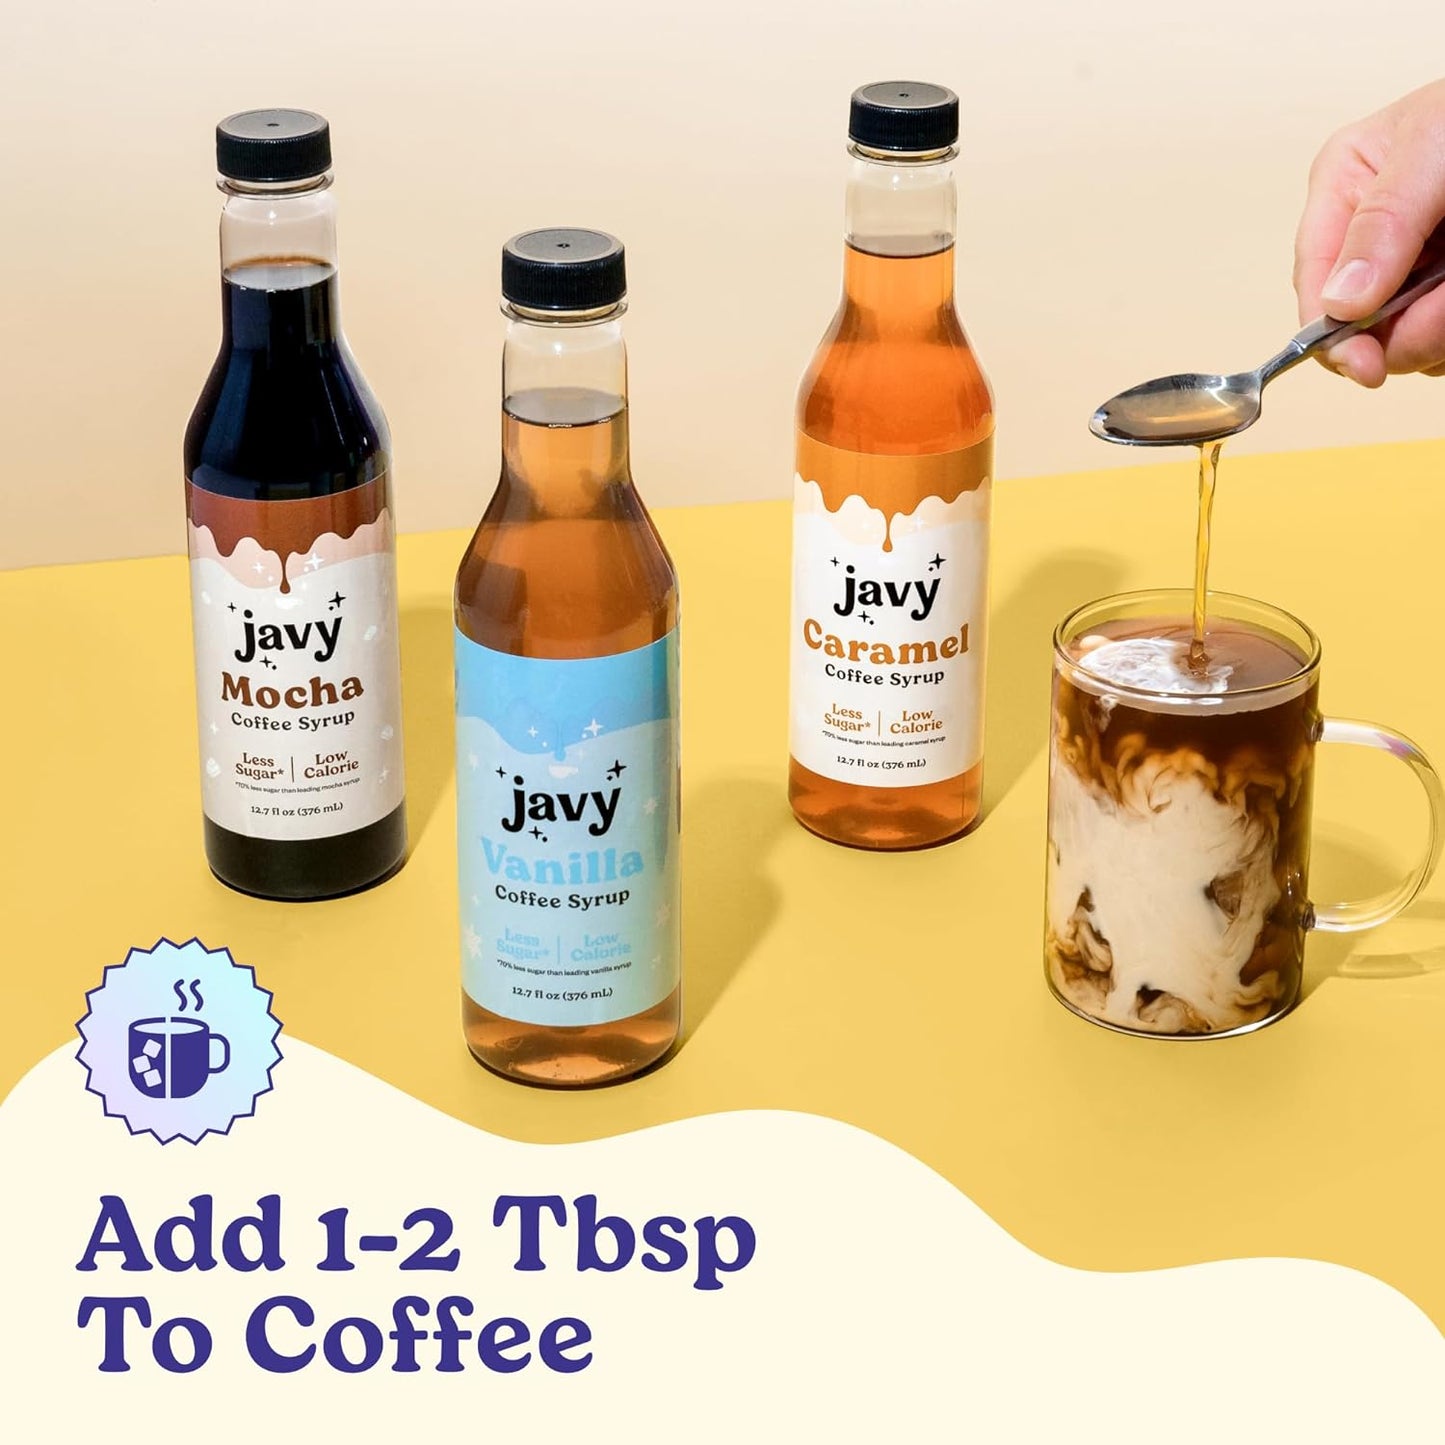 Javy Premium Mocha Coffee Syrup, Low Sugar - Low Calorie, Coffee Flavoring Syrup, Coffee Bar Accessories. Great for Flavoring All Types of Drinks